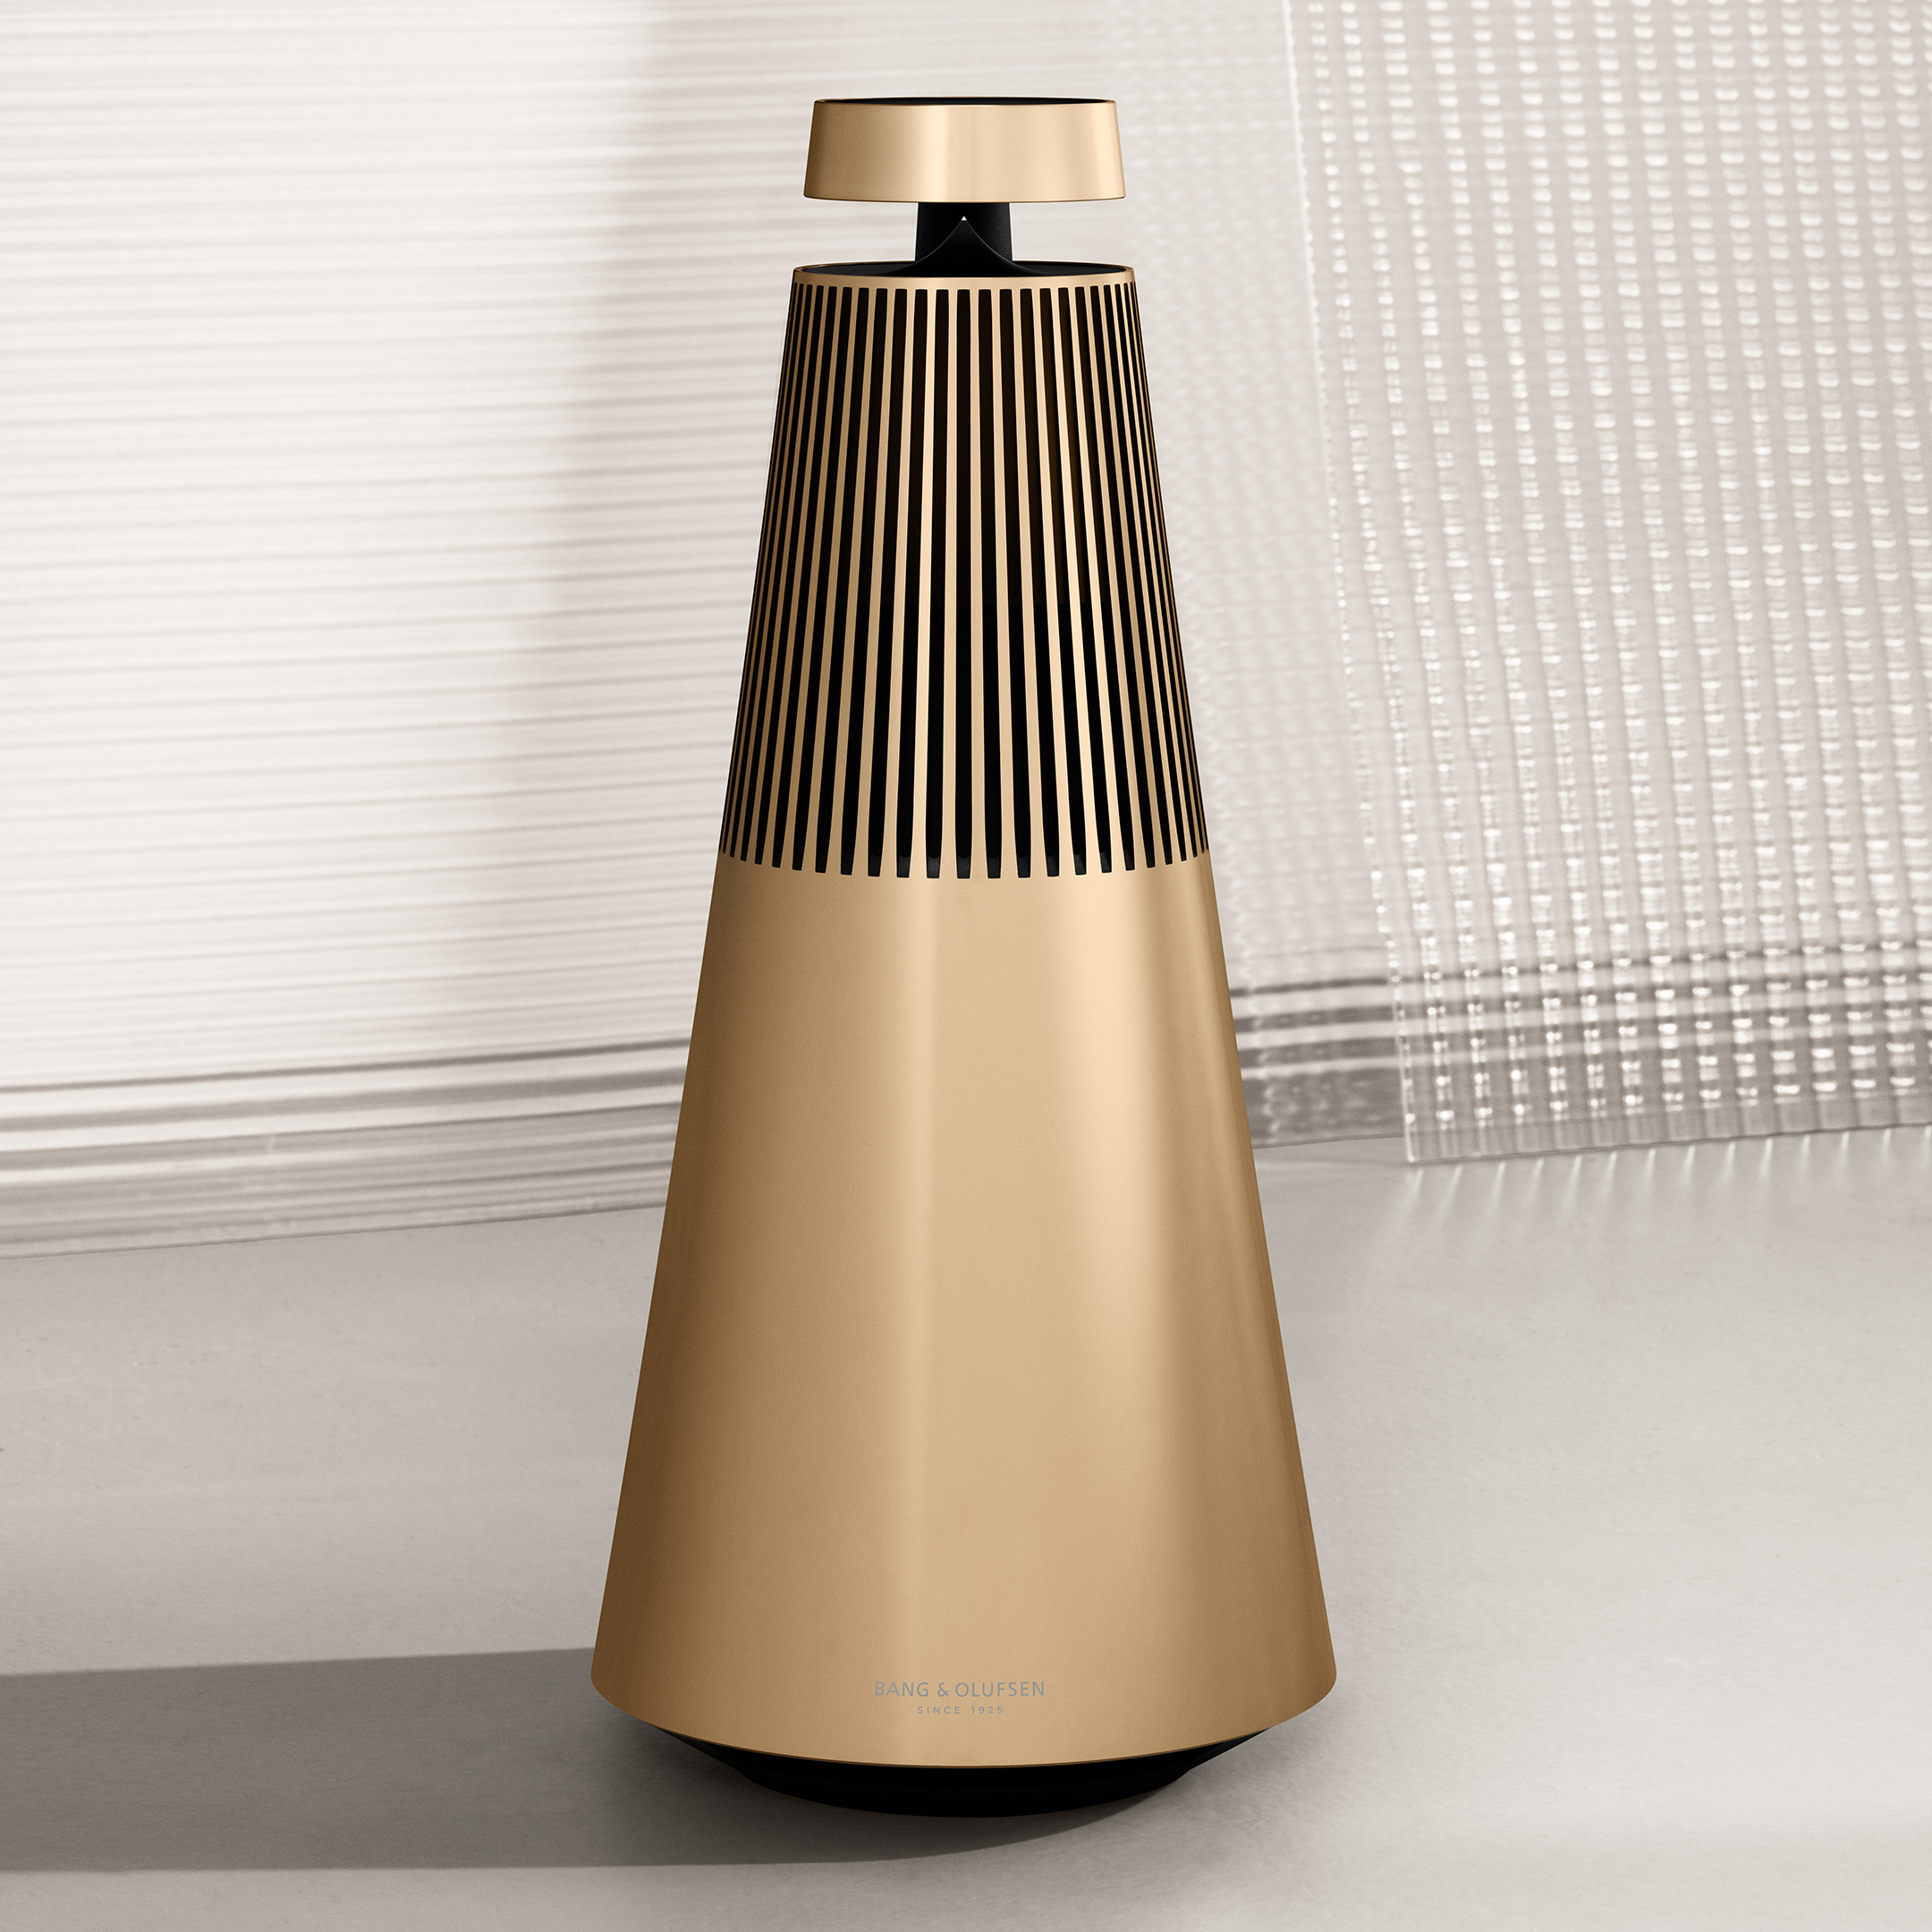 B&O Beosound 2 Golden Collection